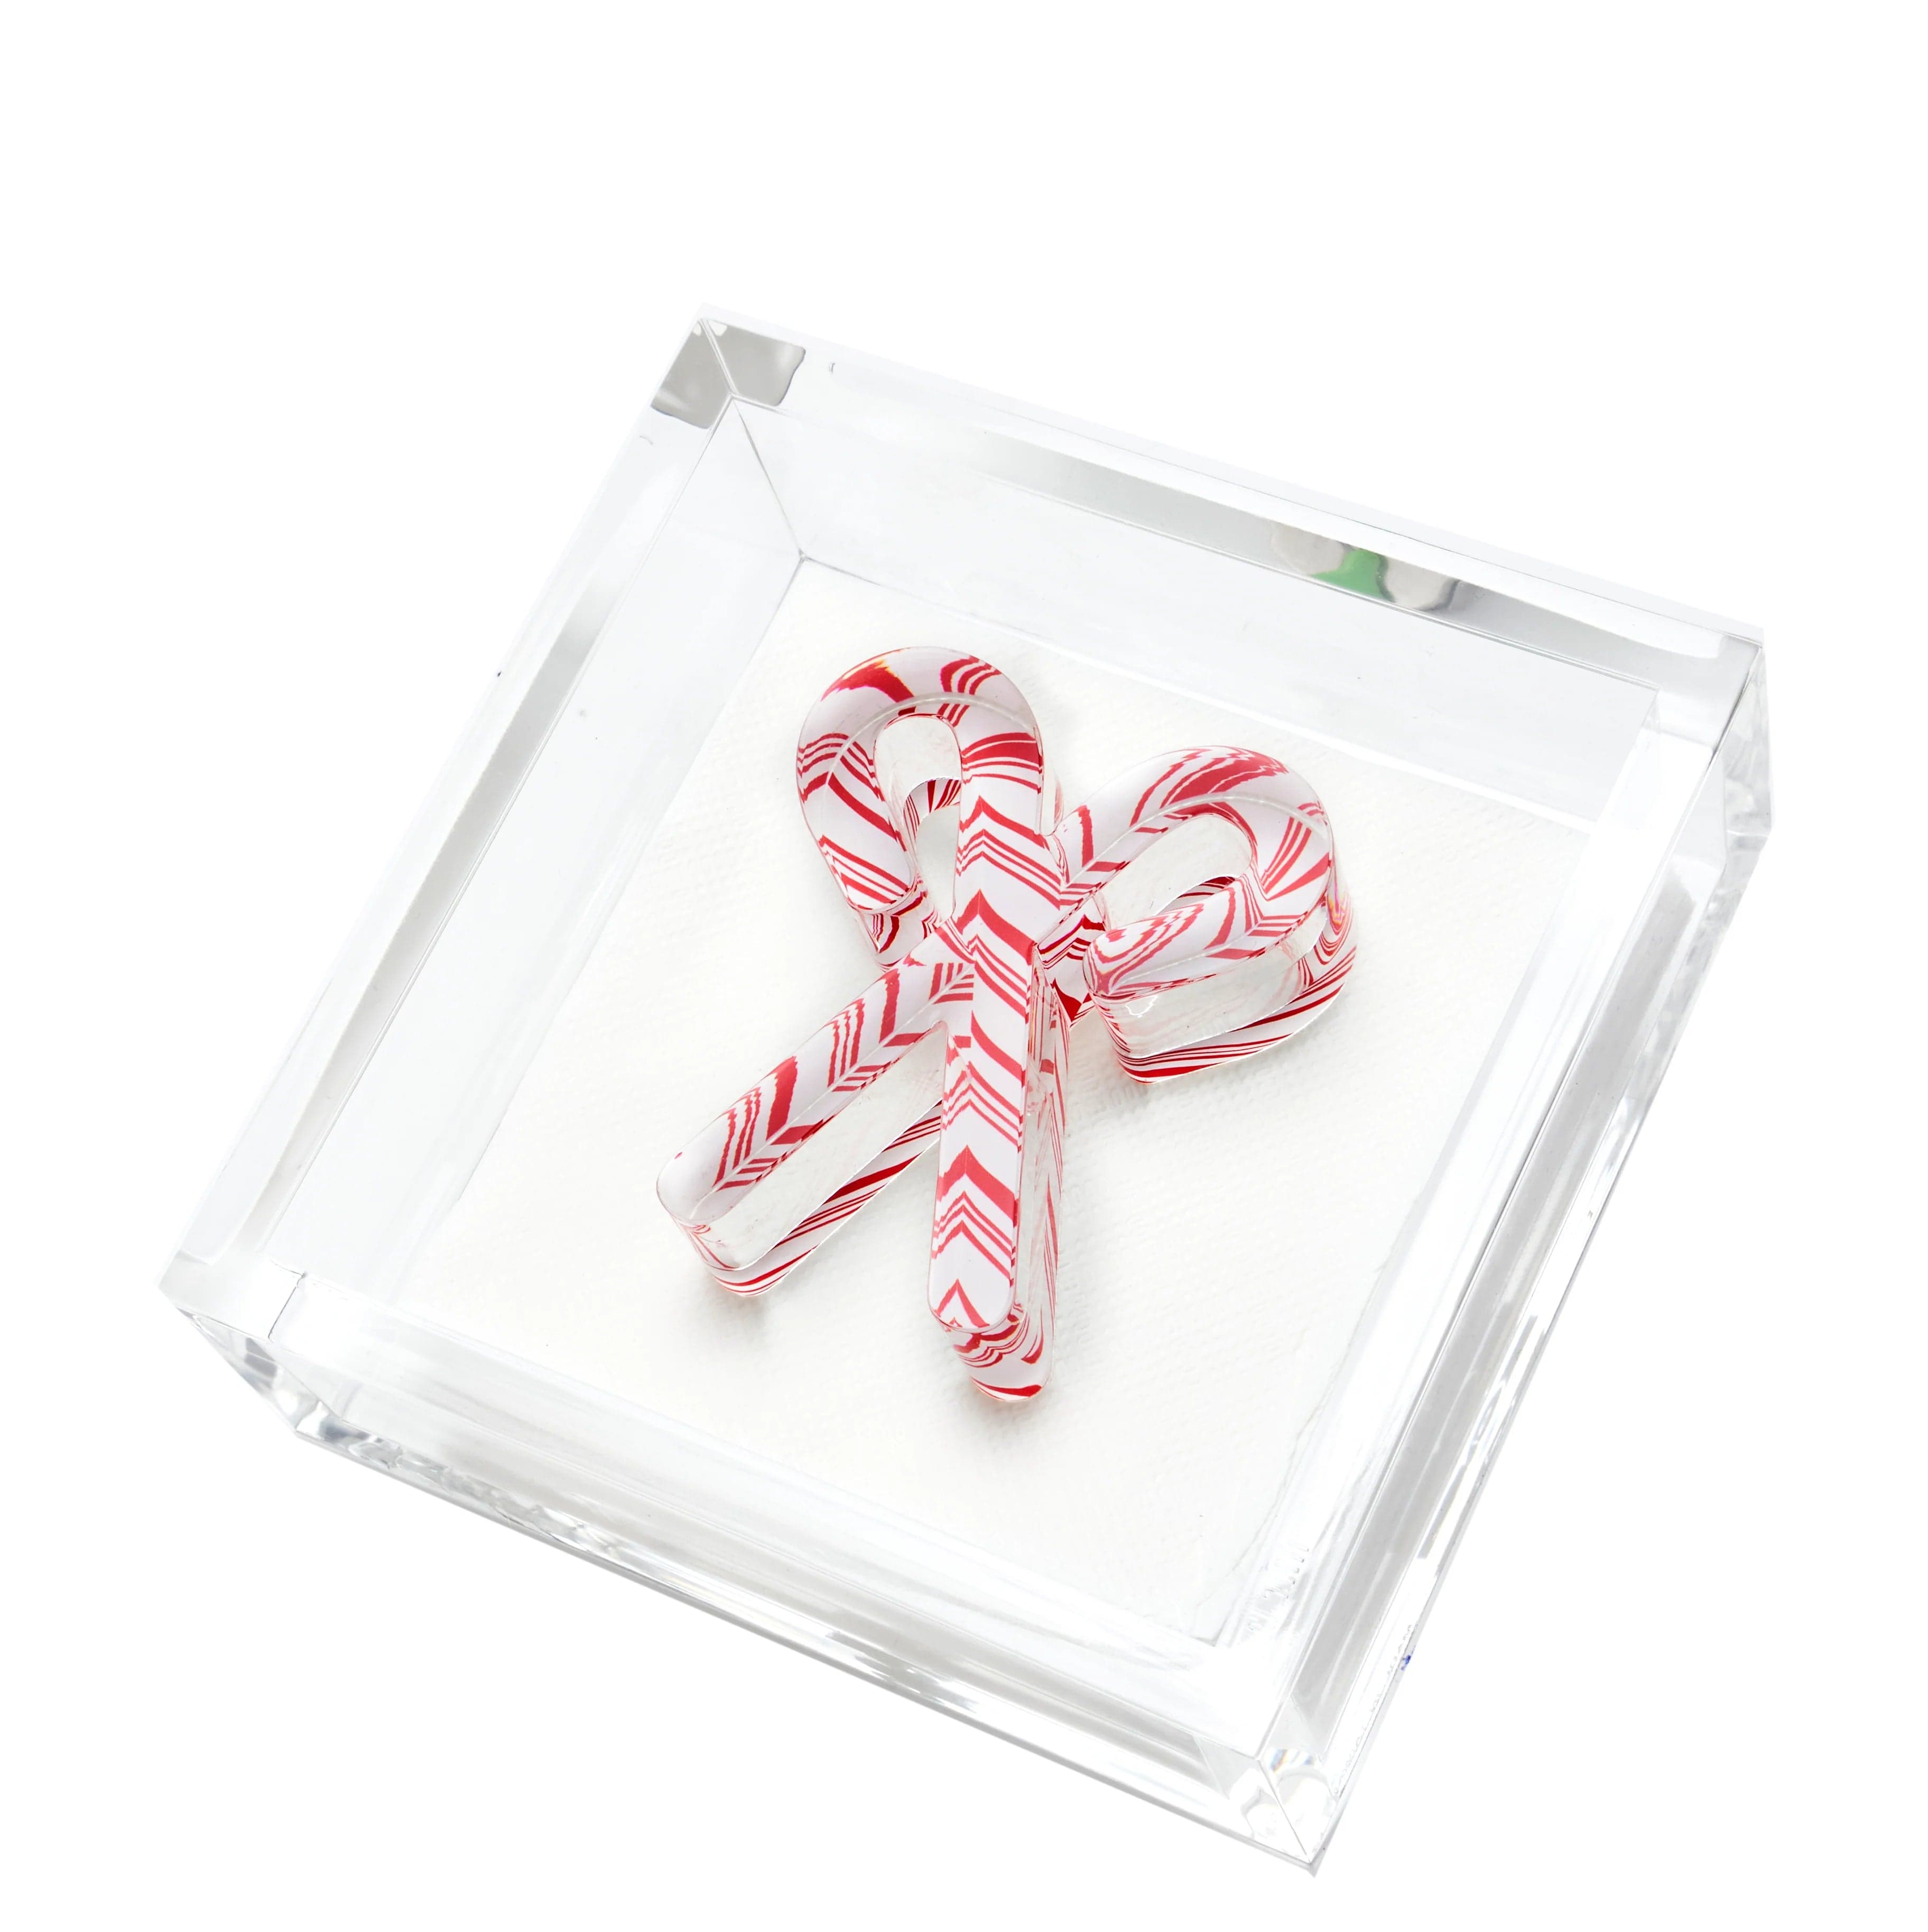 Tara Wilson Designs Home Decor Candy Canes Cocktail Napkin Holders/ Weight